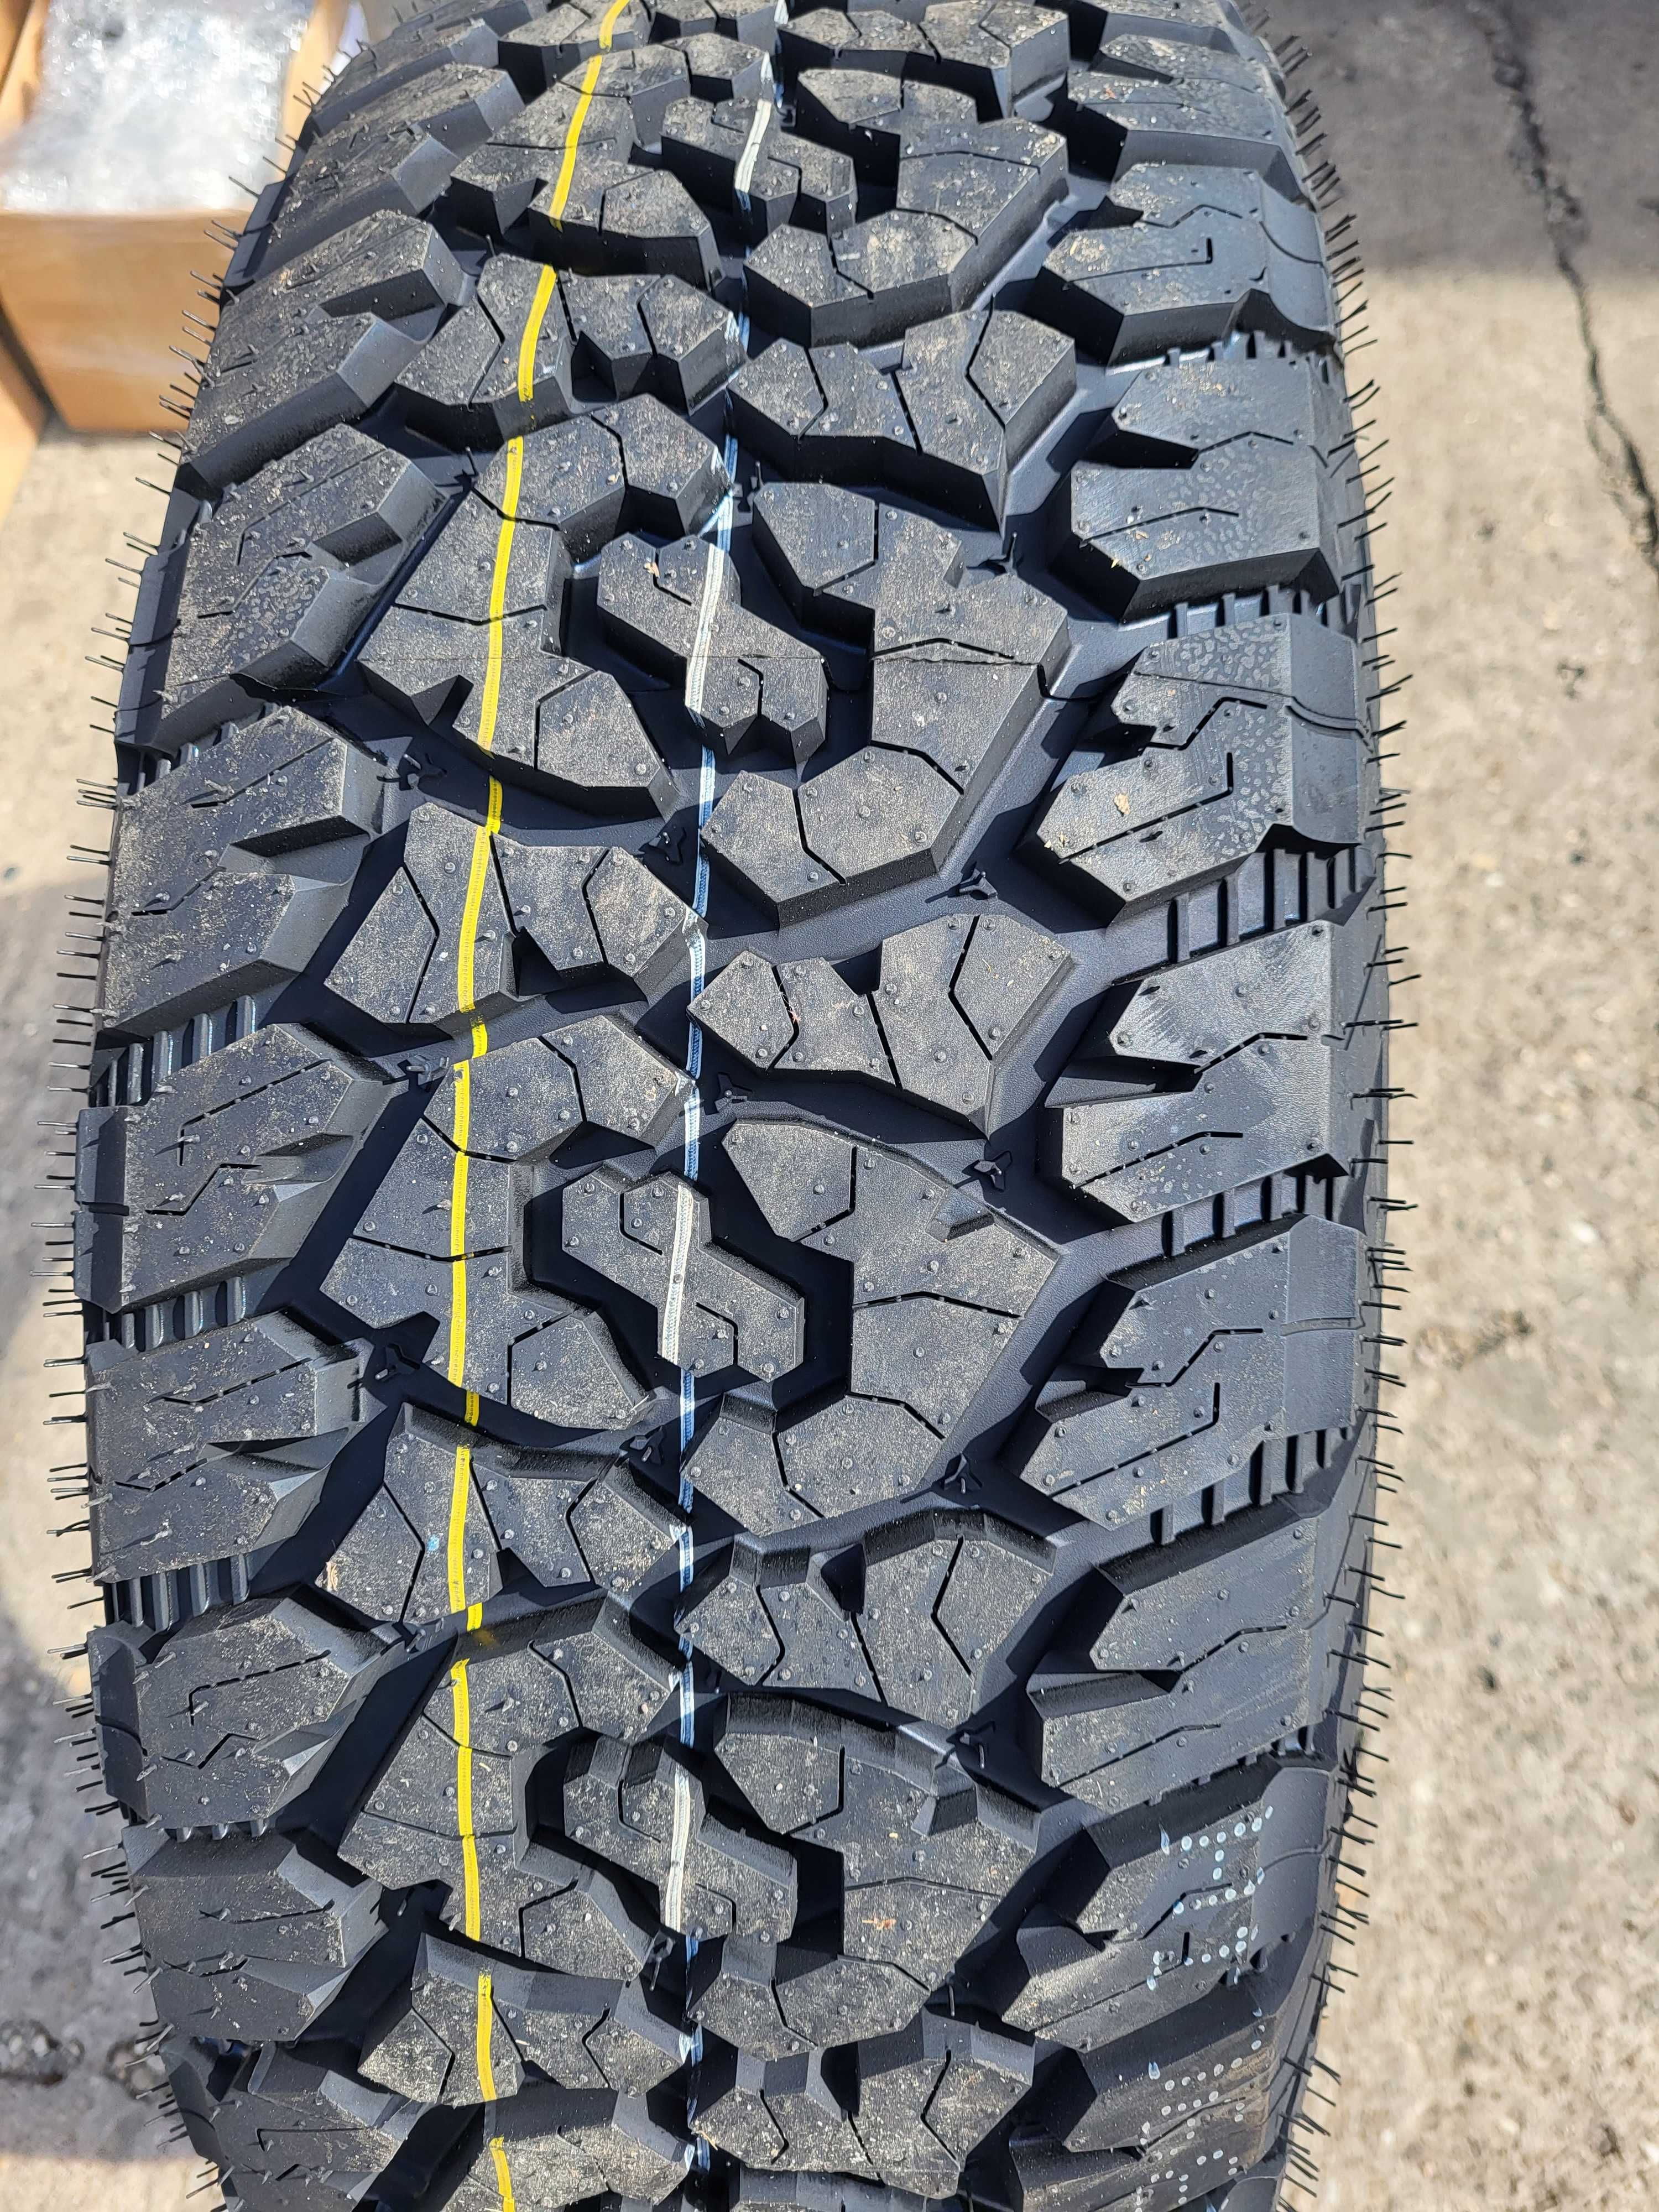 Vand anvelope noi all season,all terrain  285/70 R17 Windforce AT2 M+S